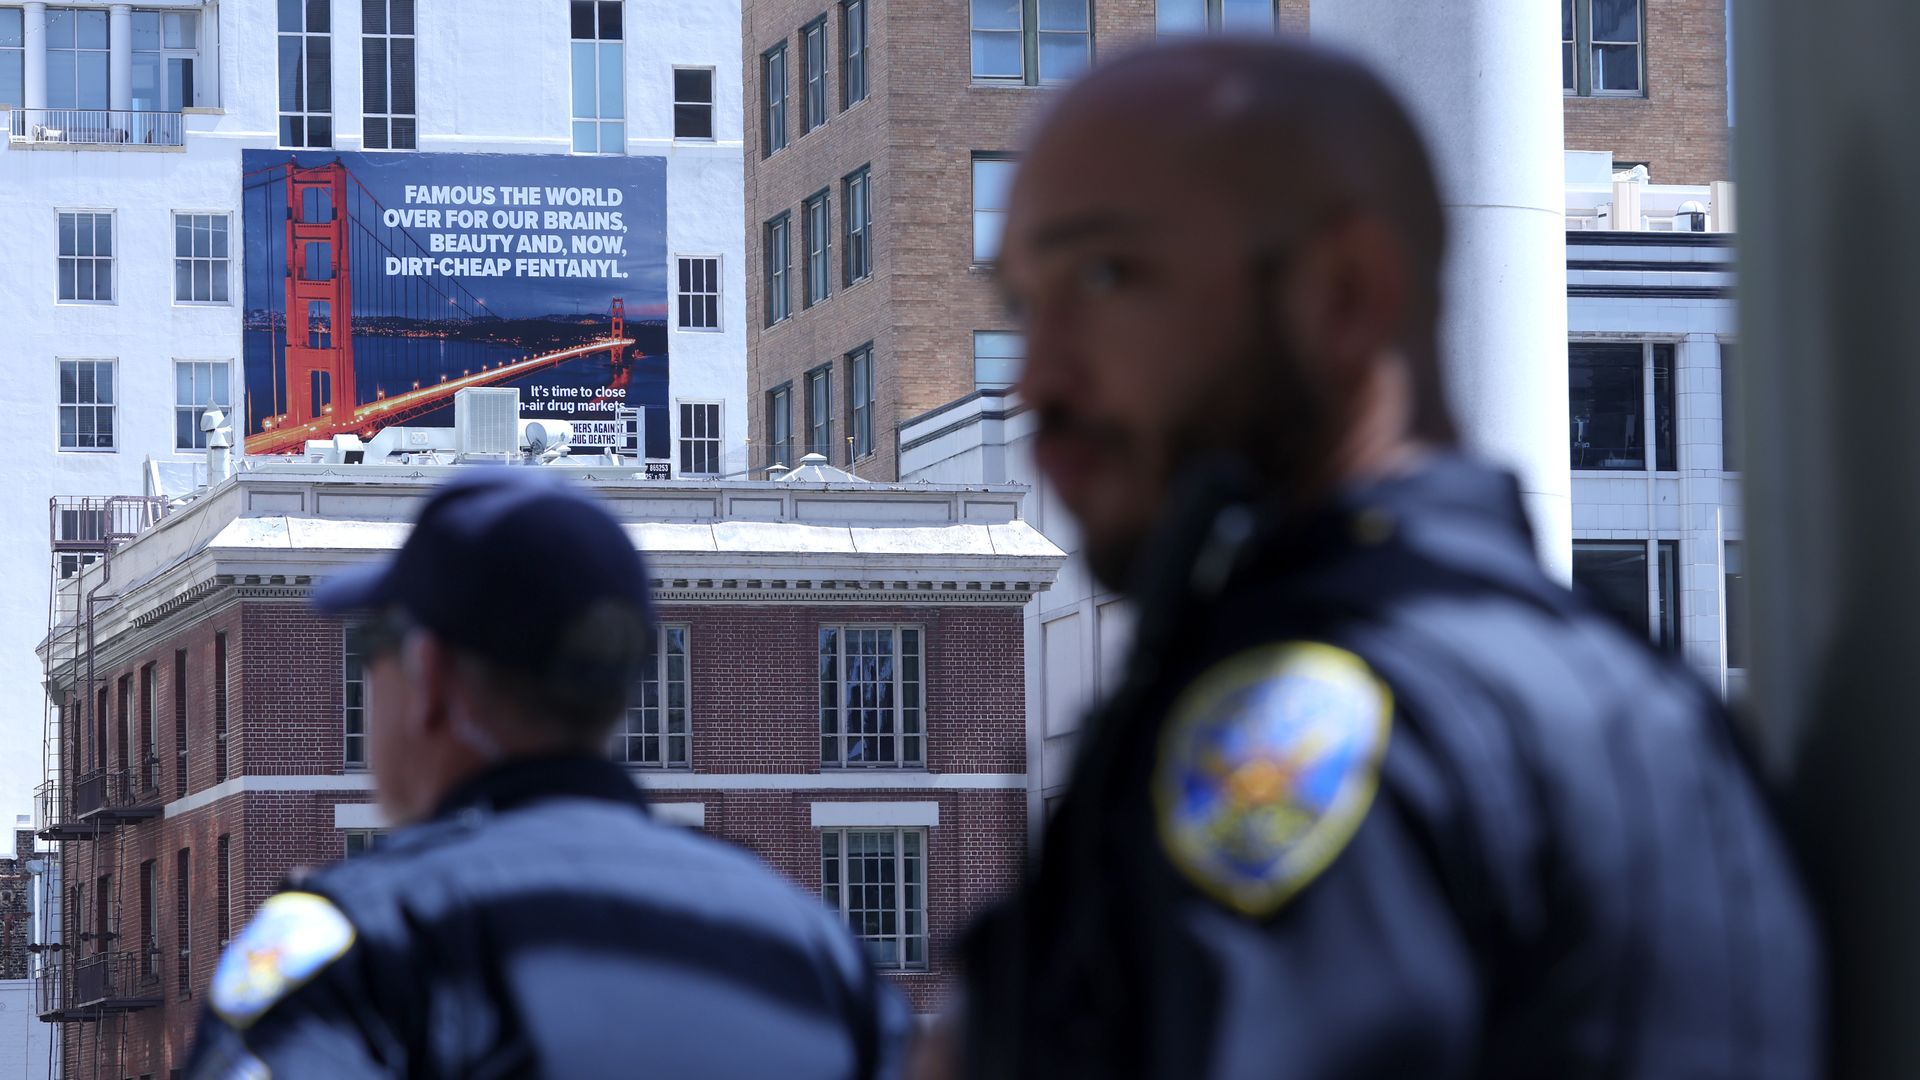 Photo of a billboard that shows the Golden Gate Bridge and text that says: "Famous the world over for our brains, beauty and now, dirt-cheap fentanyl." Two SFPD officers are in the foreground of the photo.